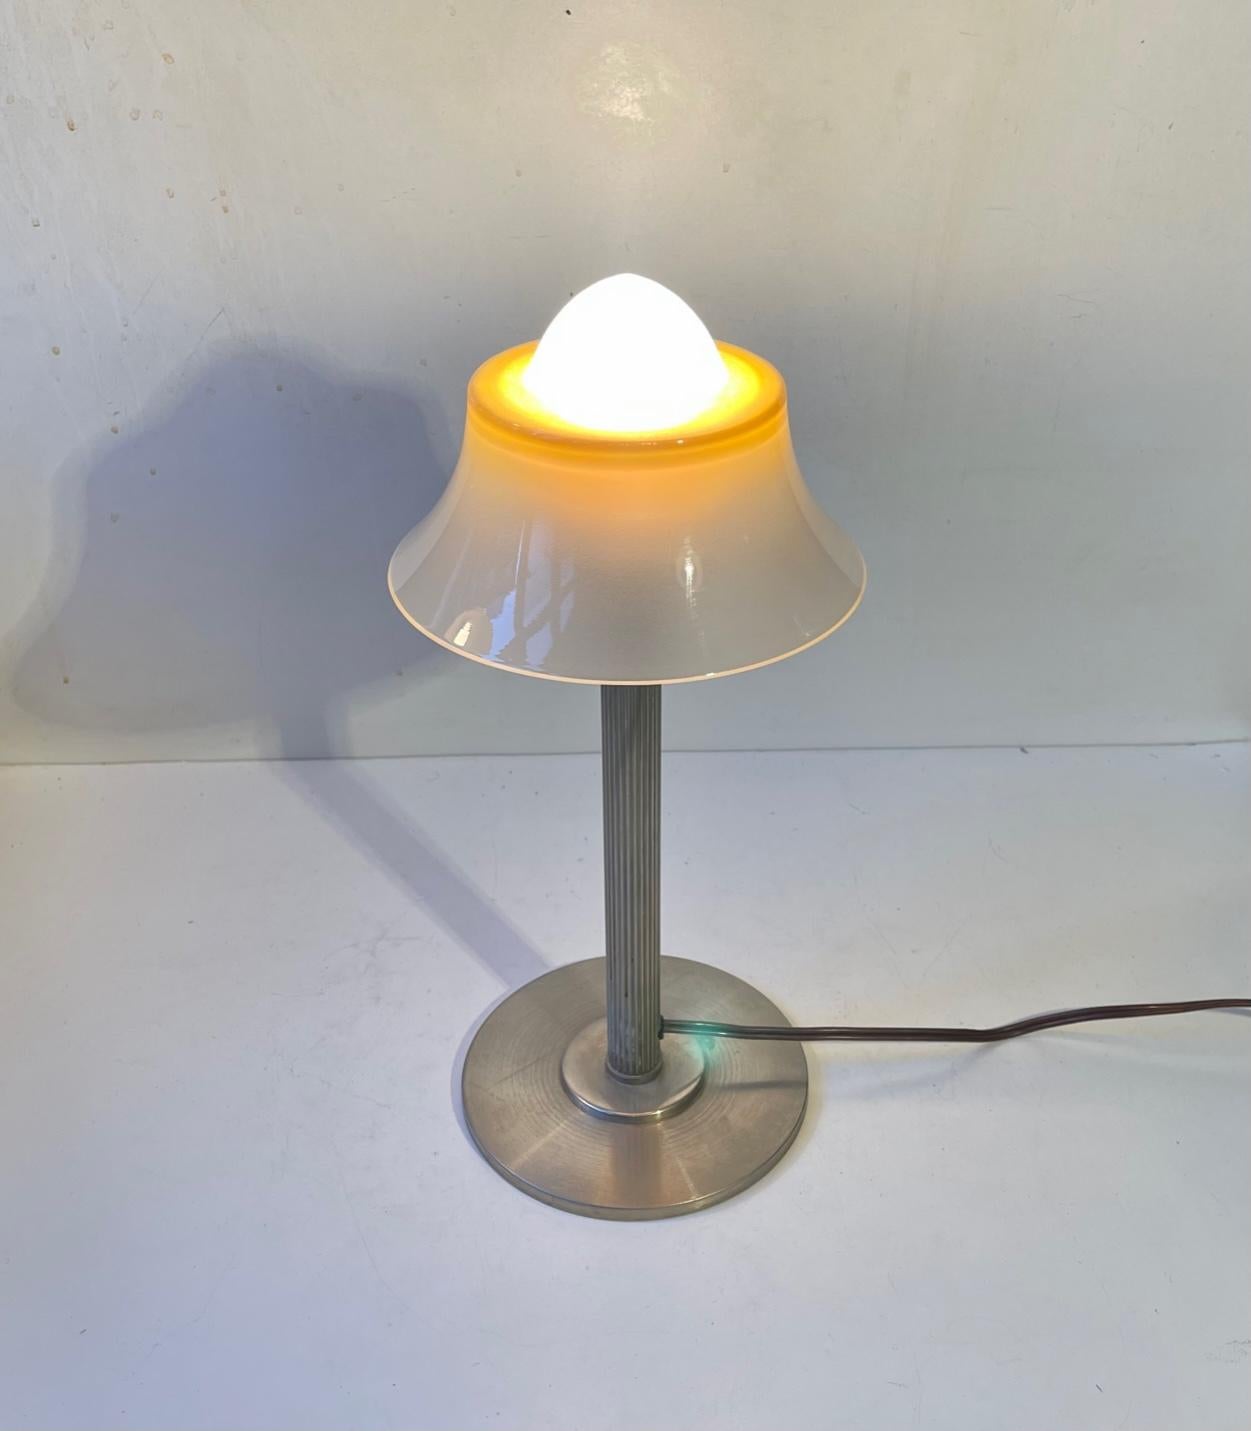 Danish Art Deco/Functionalist table light manufactured by Fog and Mørup during the 1930s. It features a fluted nickel-plated metal base and single layered, partially painted vaseline glass shade that resembles a fried egg - hence its name. This